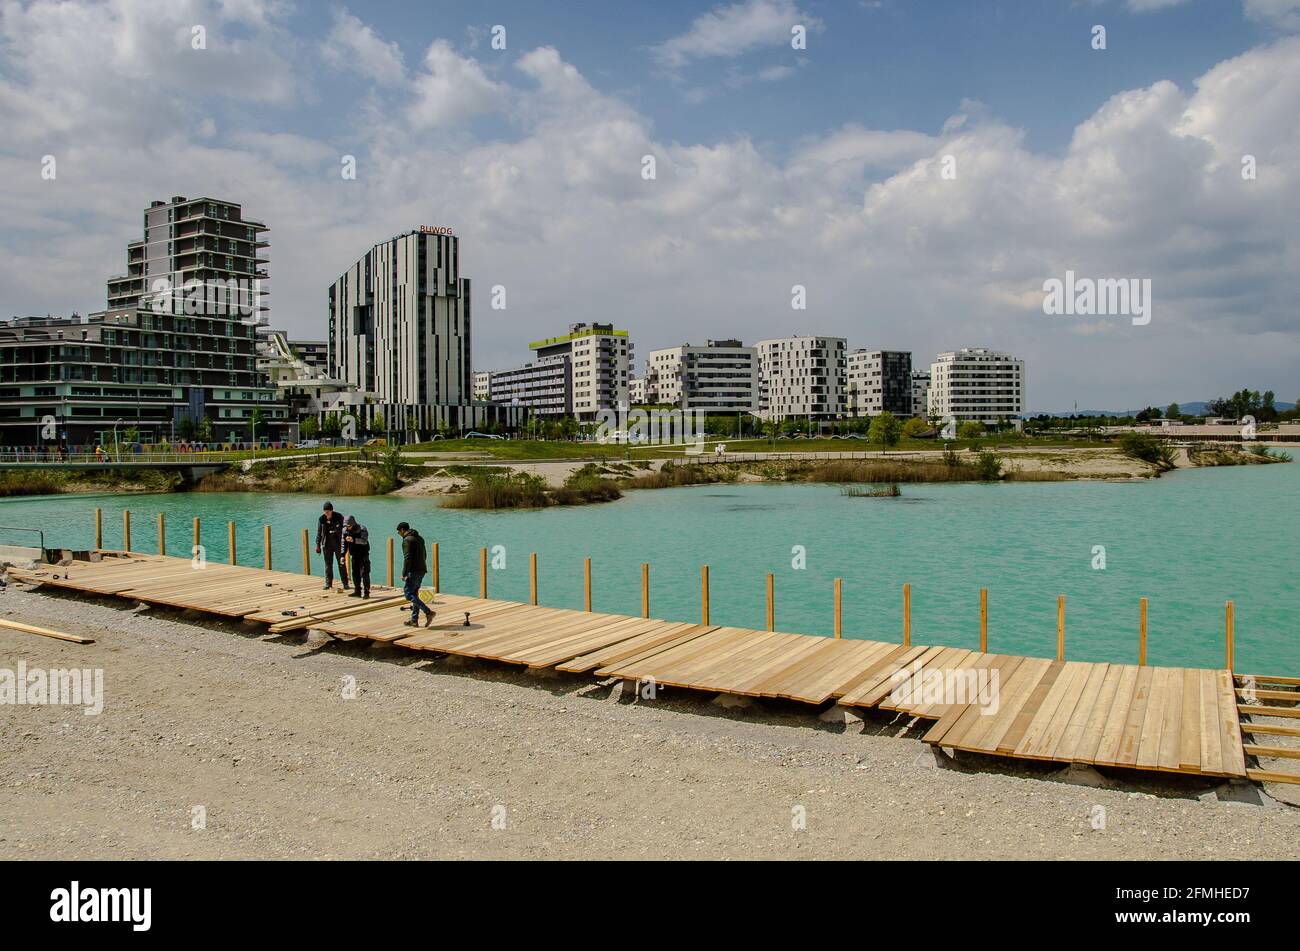 Aspern Seestadt (Lakeside City) is one of Europe’s largest urban development projects. Located in Vienna’s fast-growing north-eastern 22nd district Stock Photo